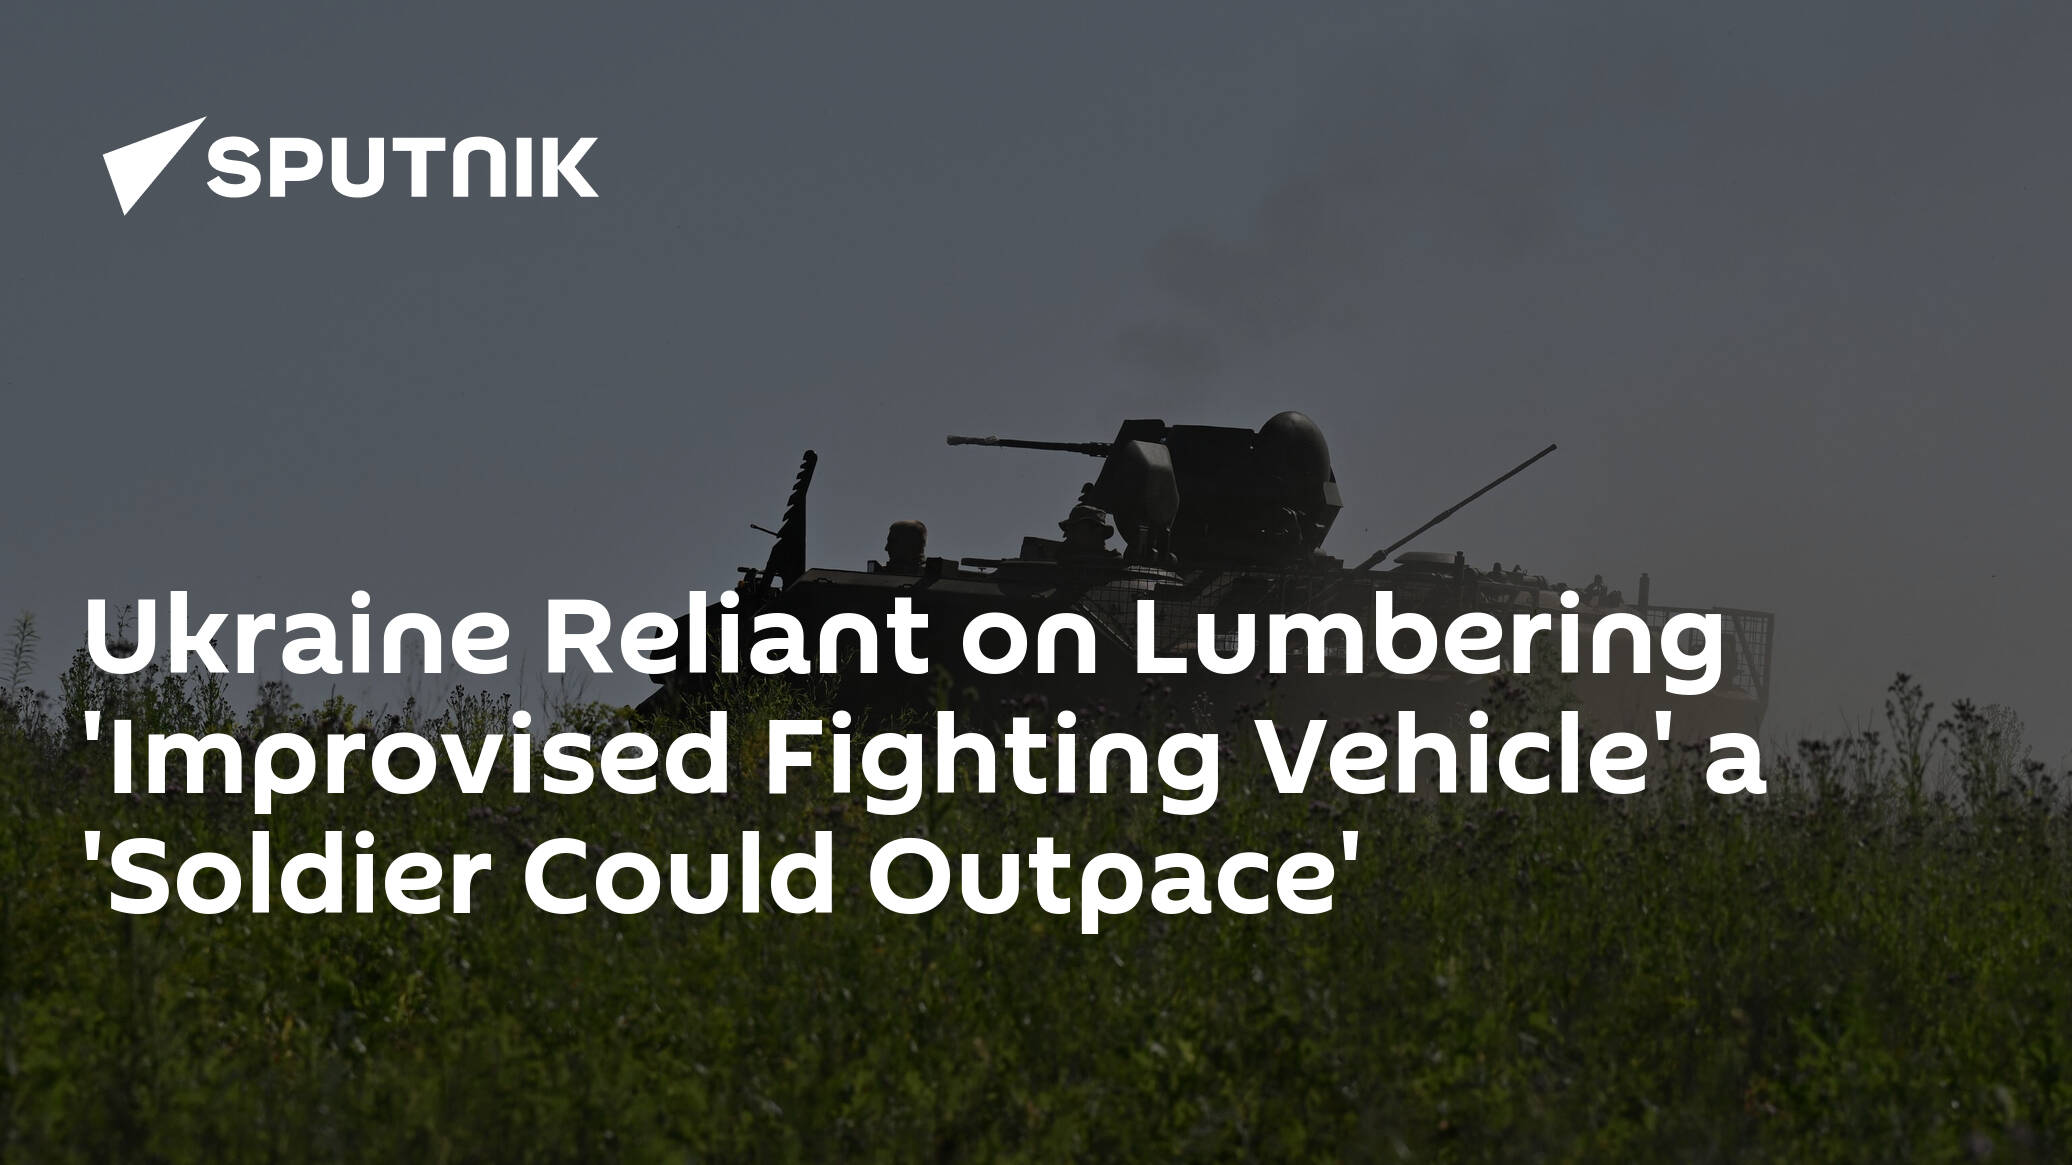 Ukraine Relies on ‘Improvised Fighting Vehicle’ a ‘Soldier Can Outpace’